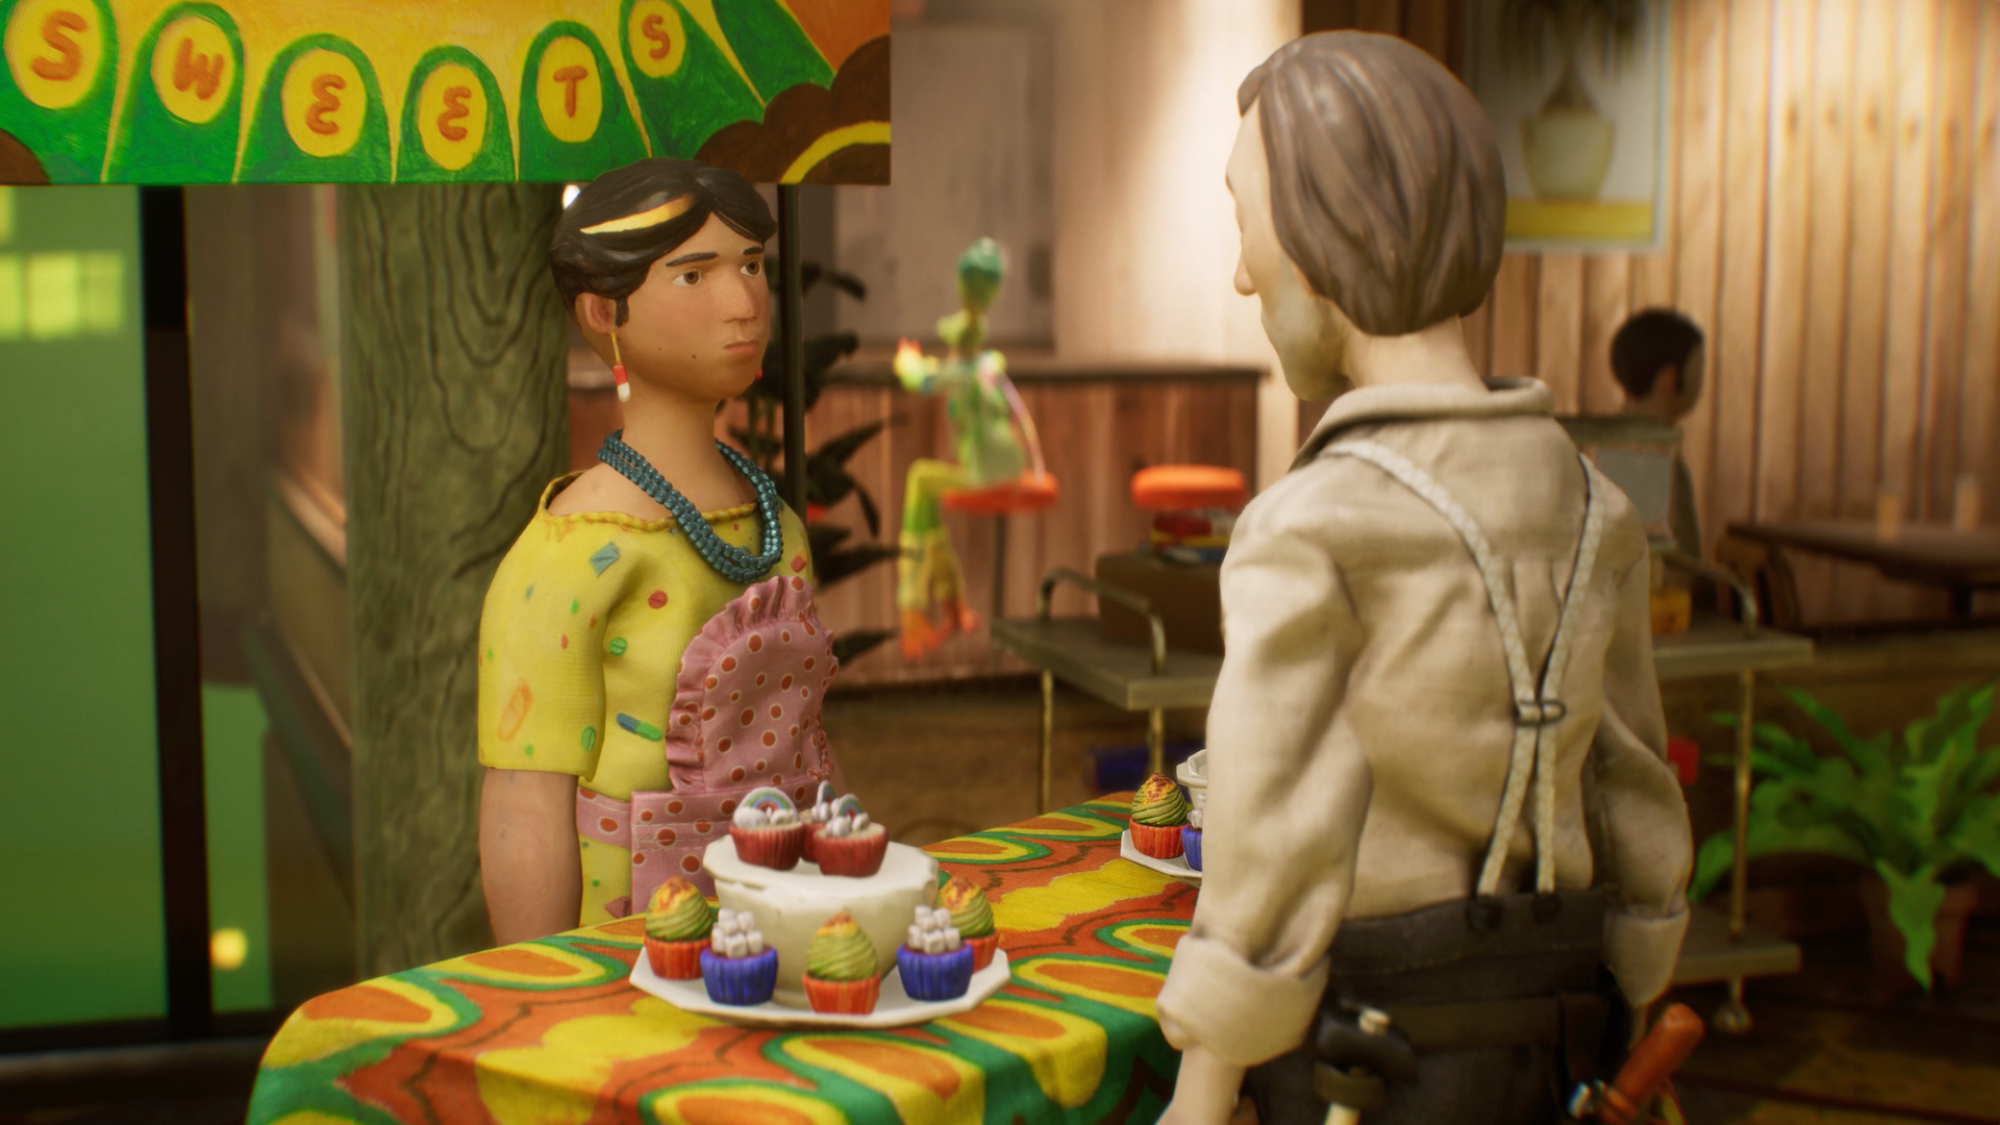 A brightly colored image of two characters at a sweet stand with cupcakes on a table, in a room with lush green plants and a translucent figure in the background.